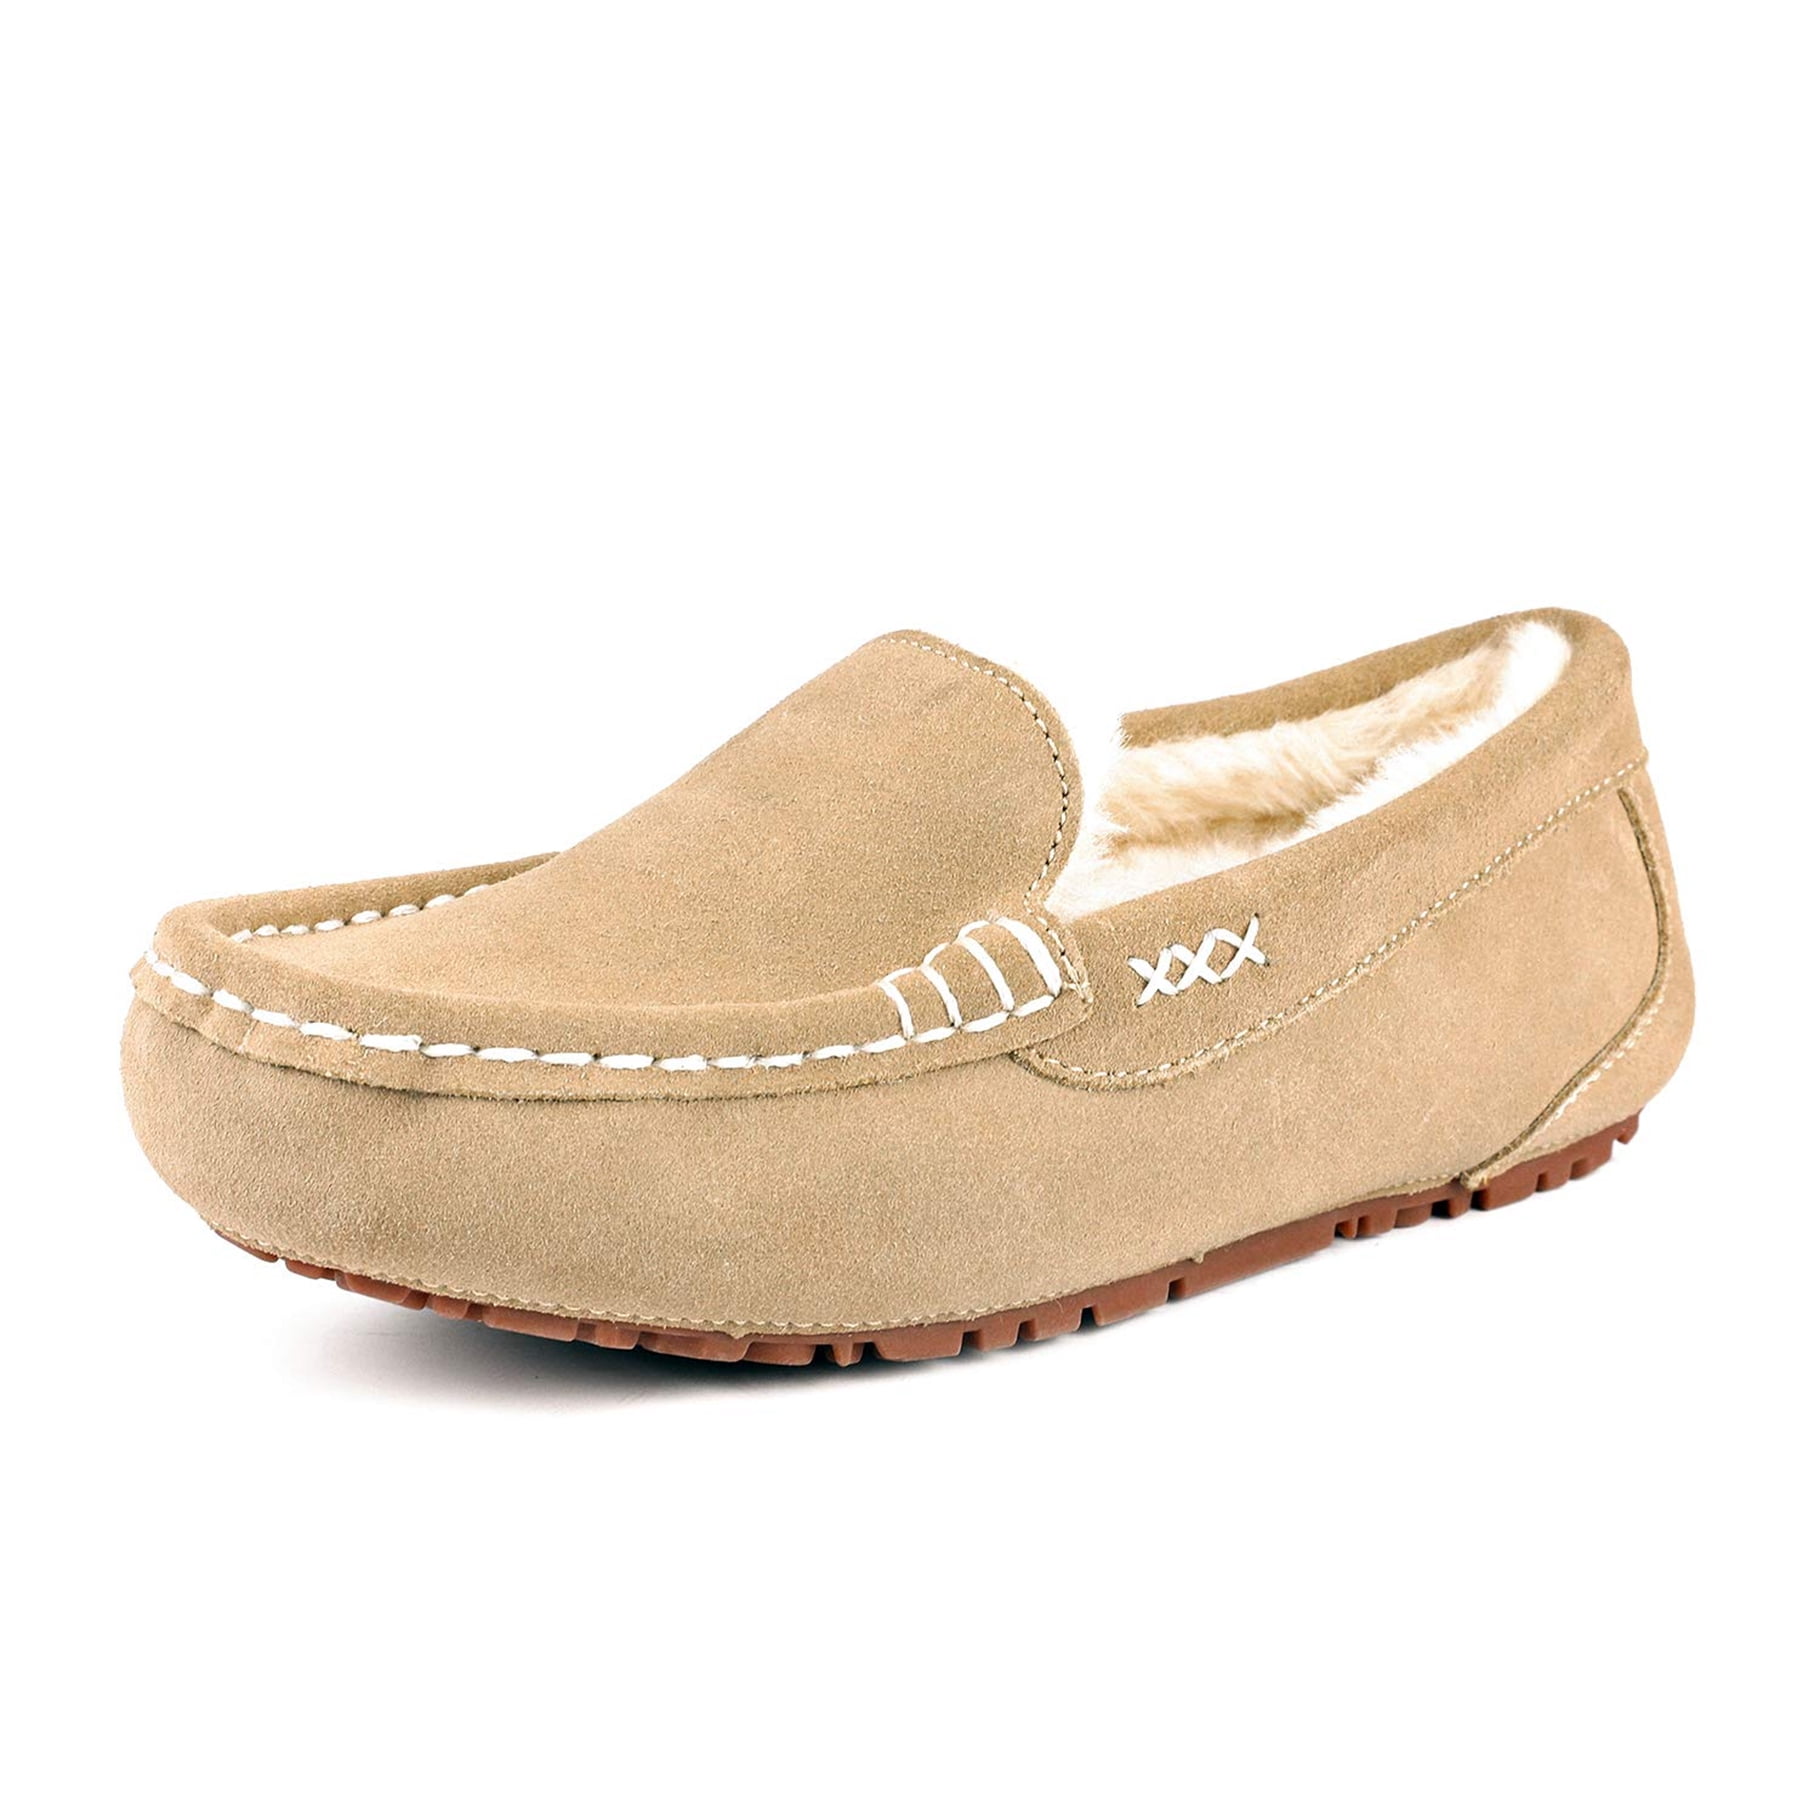 New Cushion Walk Mens Slip On Faux Suede Moccasins Slippers Warm Comfy Size 8-11 